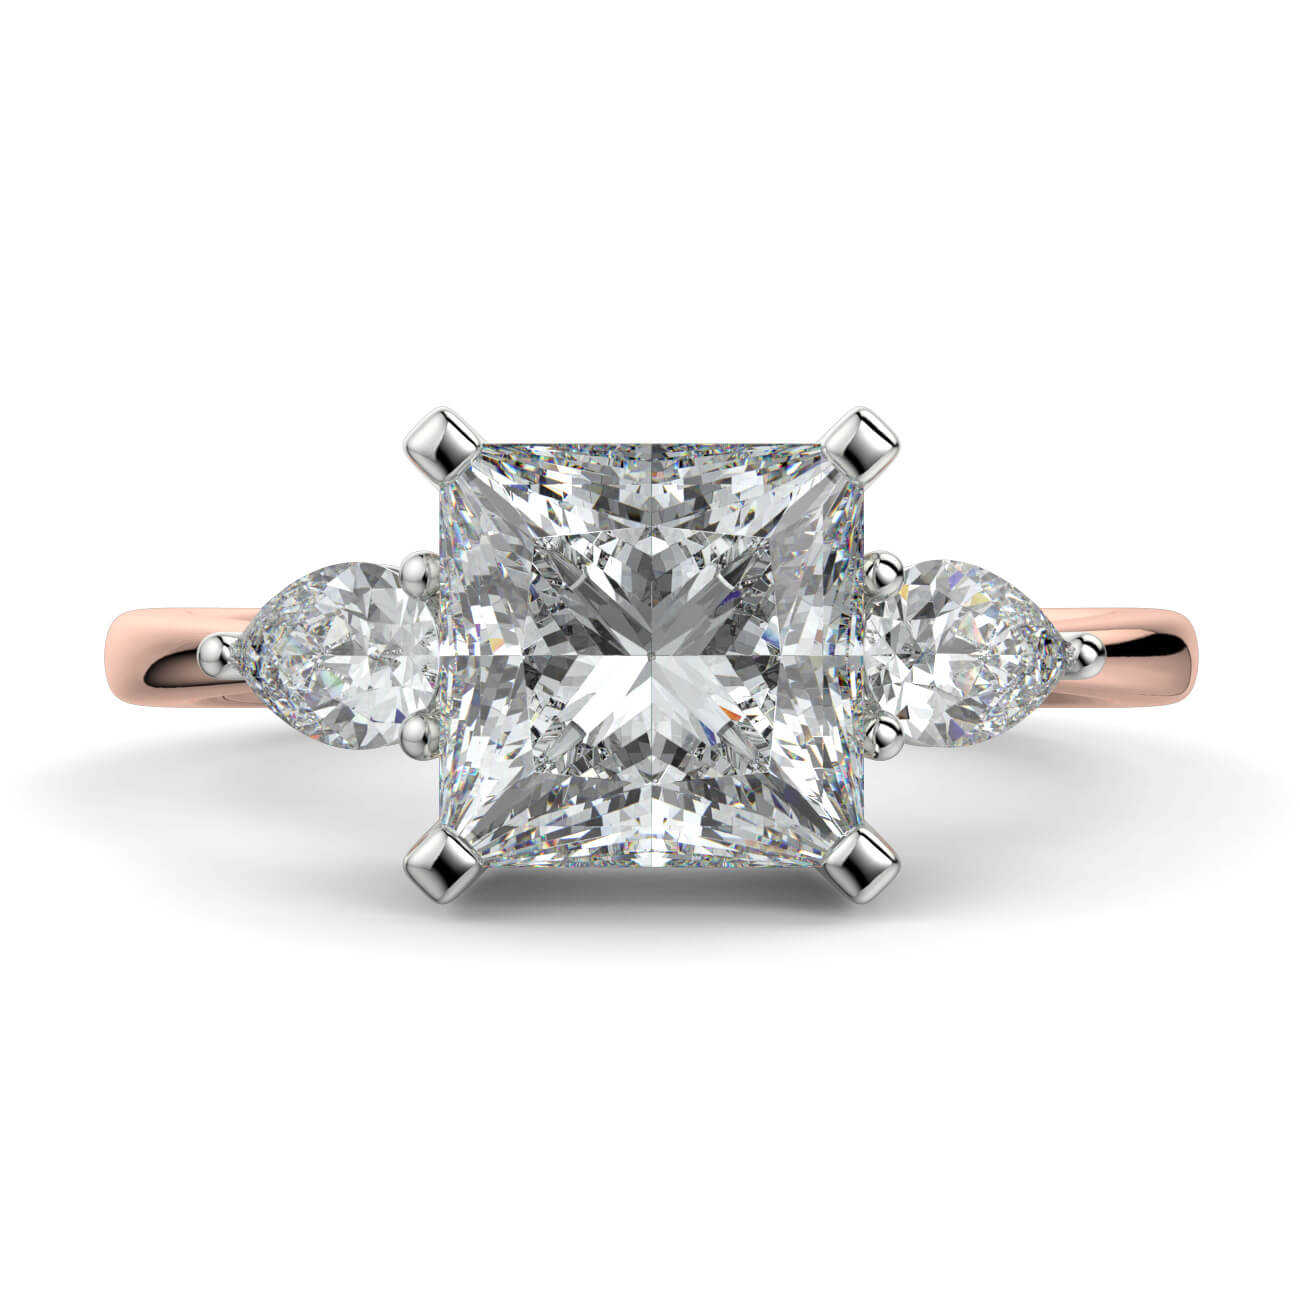 Princess Cut Diamond Ring With Pear Shape Side Diamonds In Rose and White Gold – Australian Diamond Network